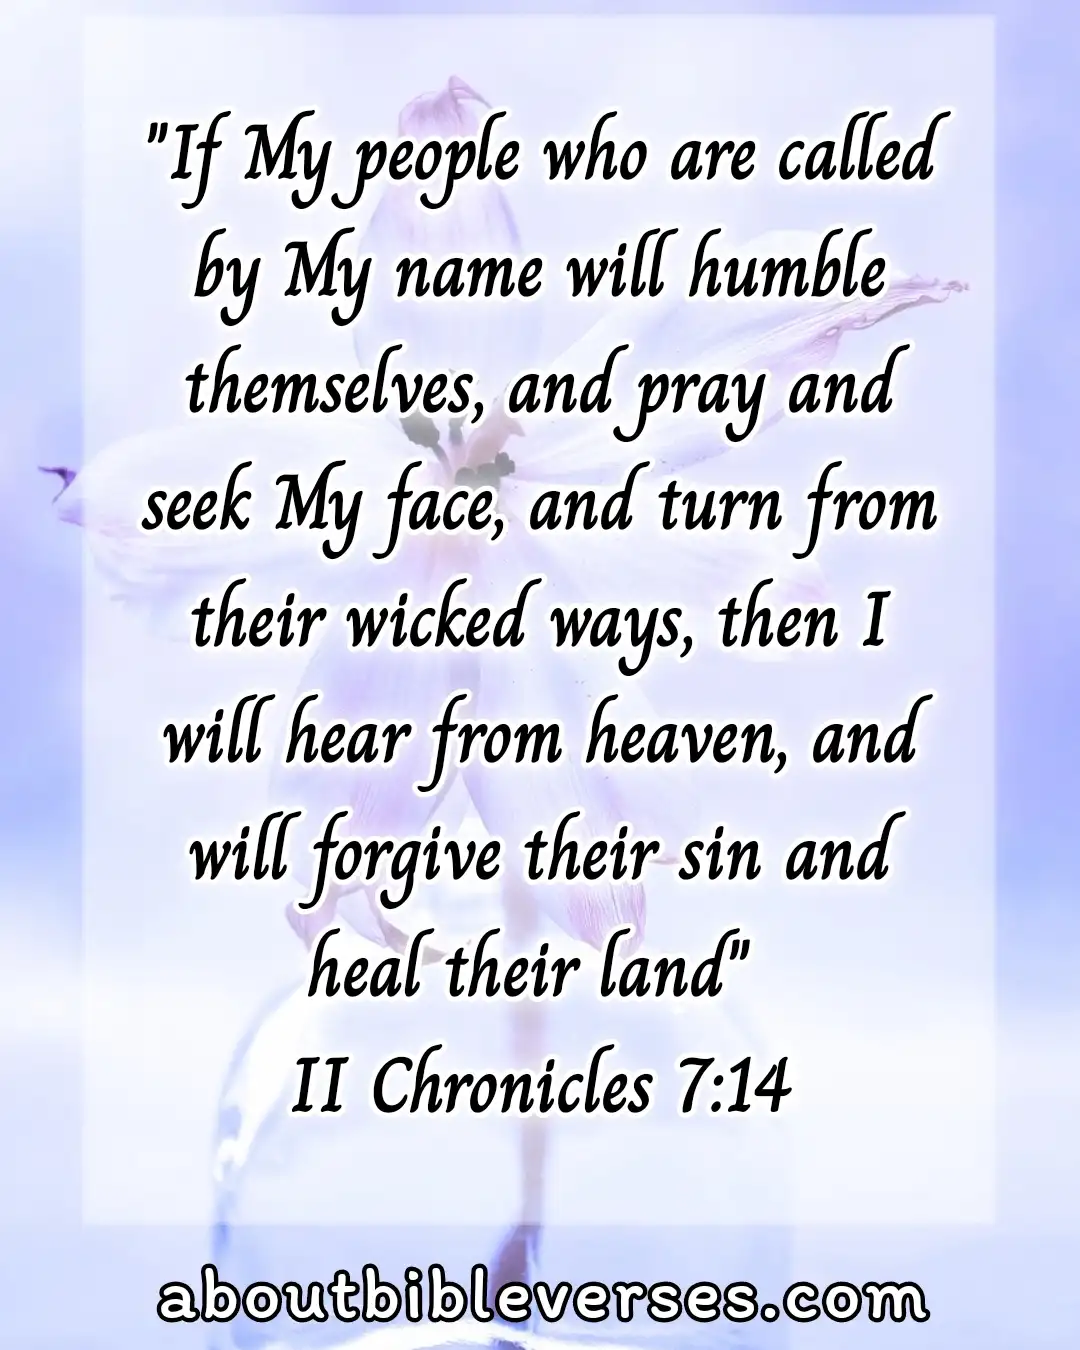 Bible Verses For Humble (2 Chronicles 7:14)